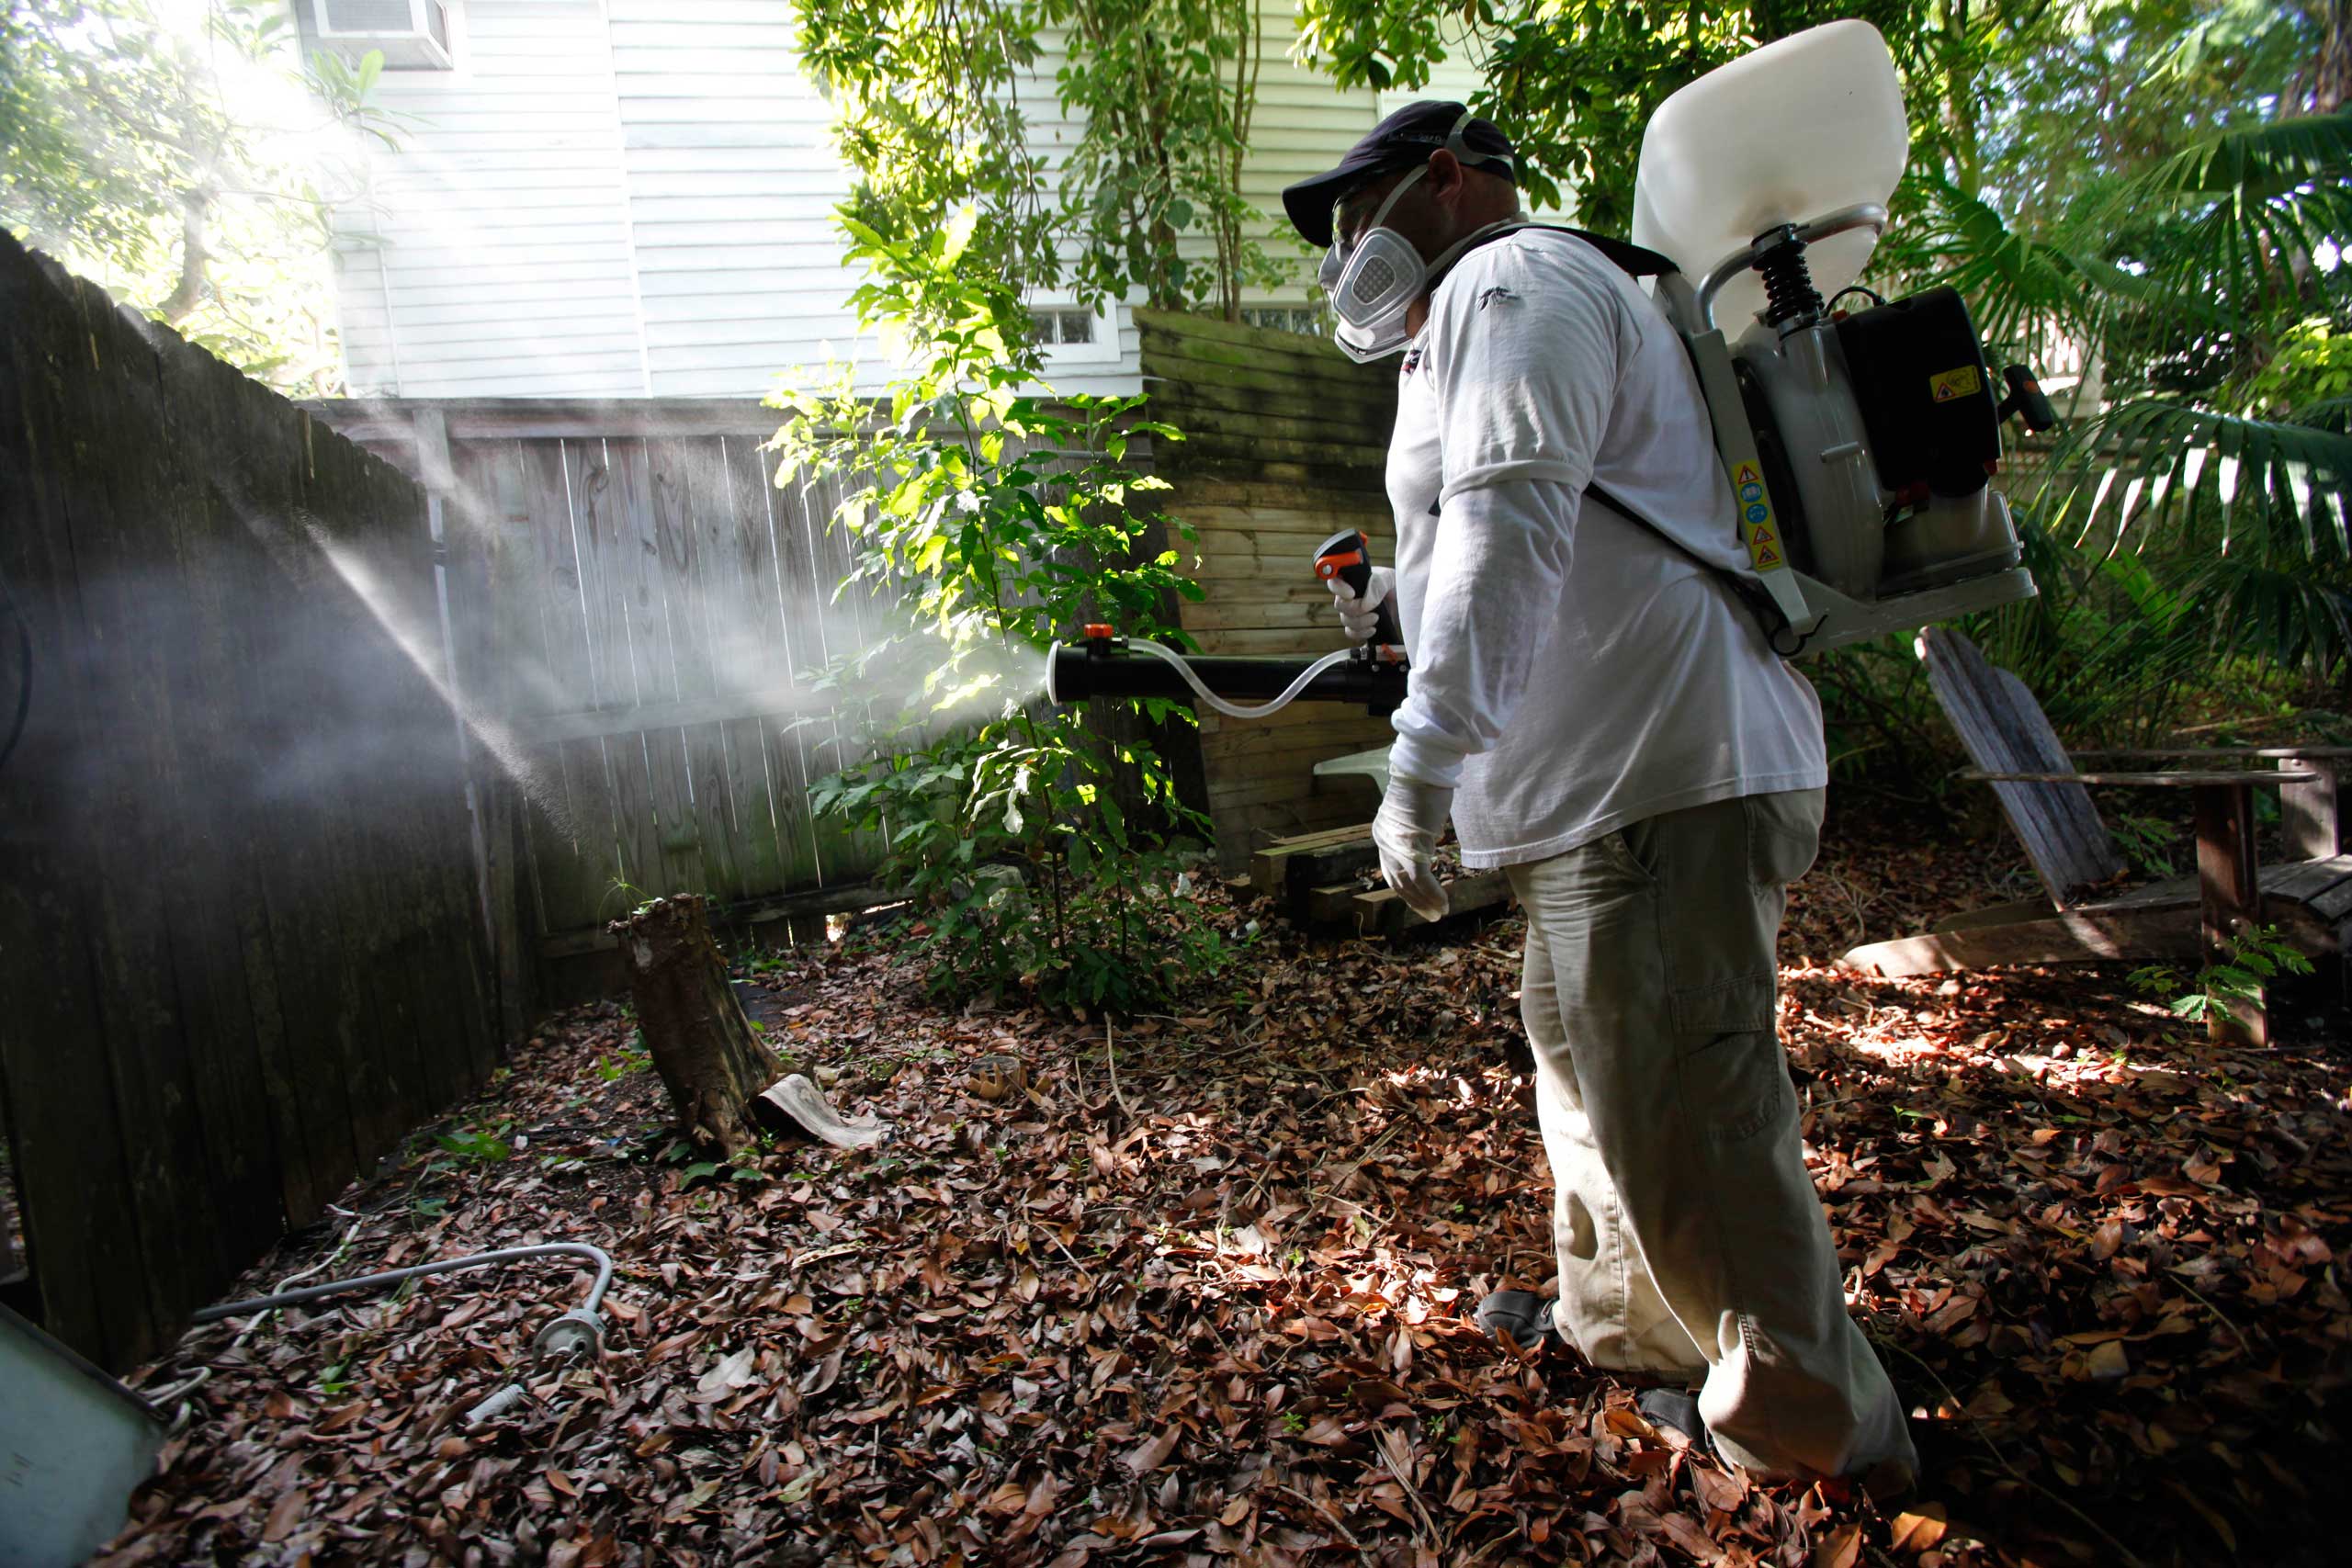 Jason Garcia, a field inspector with the Florida Keys Mosquito Control District, tests a sprayer that could be used in the future to spray pesticides to control mosquitos in Key West, Fla., on Oct. 4, 2012 (Wilfredo Lee&mdash;AP)